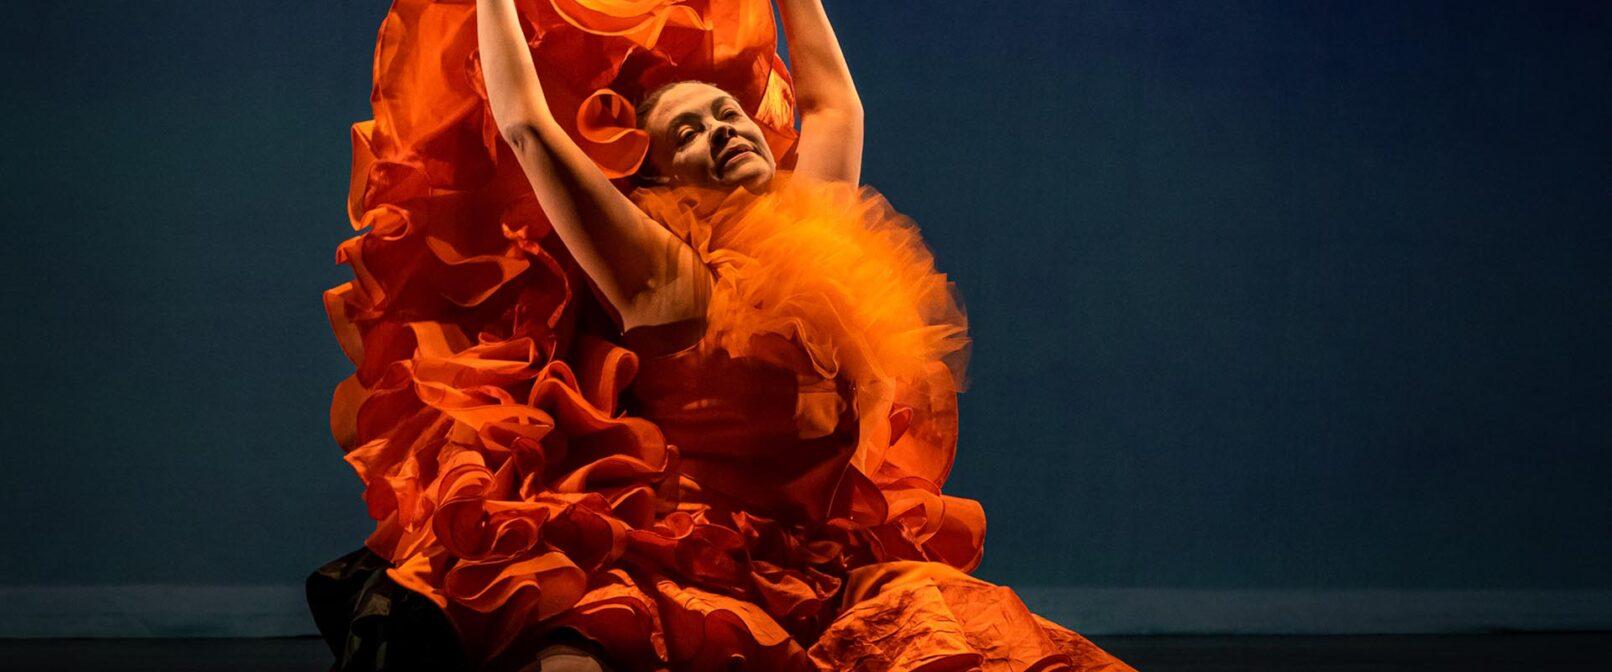 Bailando. Person in ruffled orange chiffon top with full, ruffled orange skirt kneels with arms raised high, holding edges of the skirt.